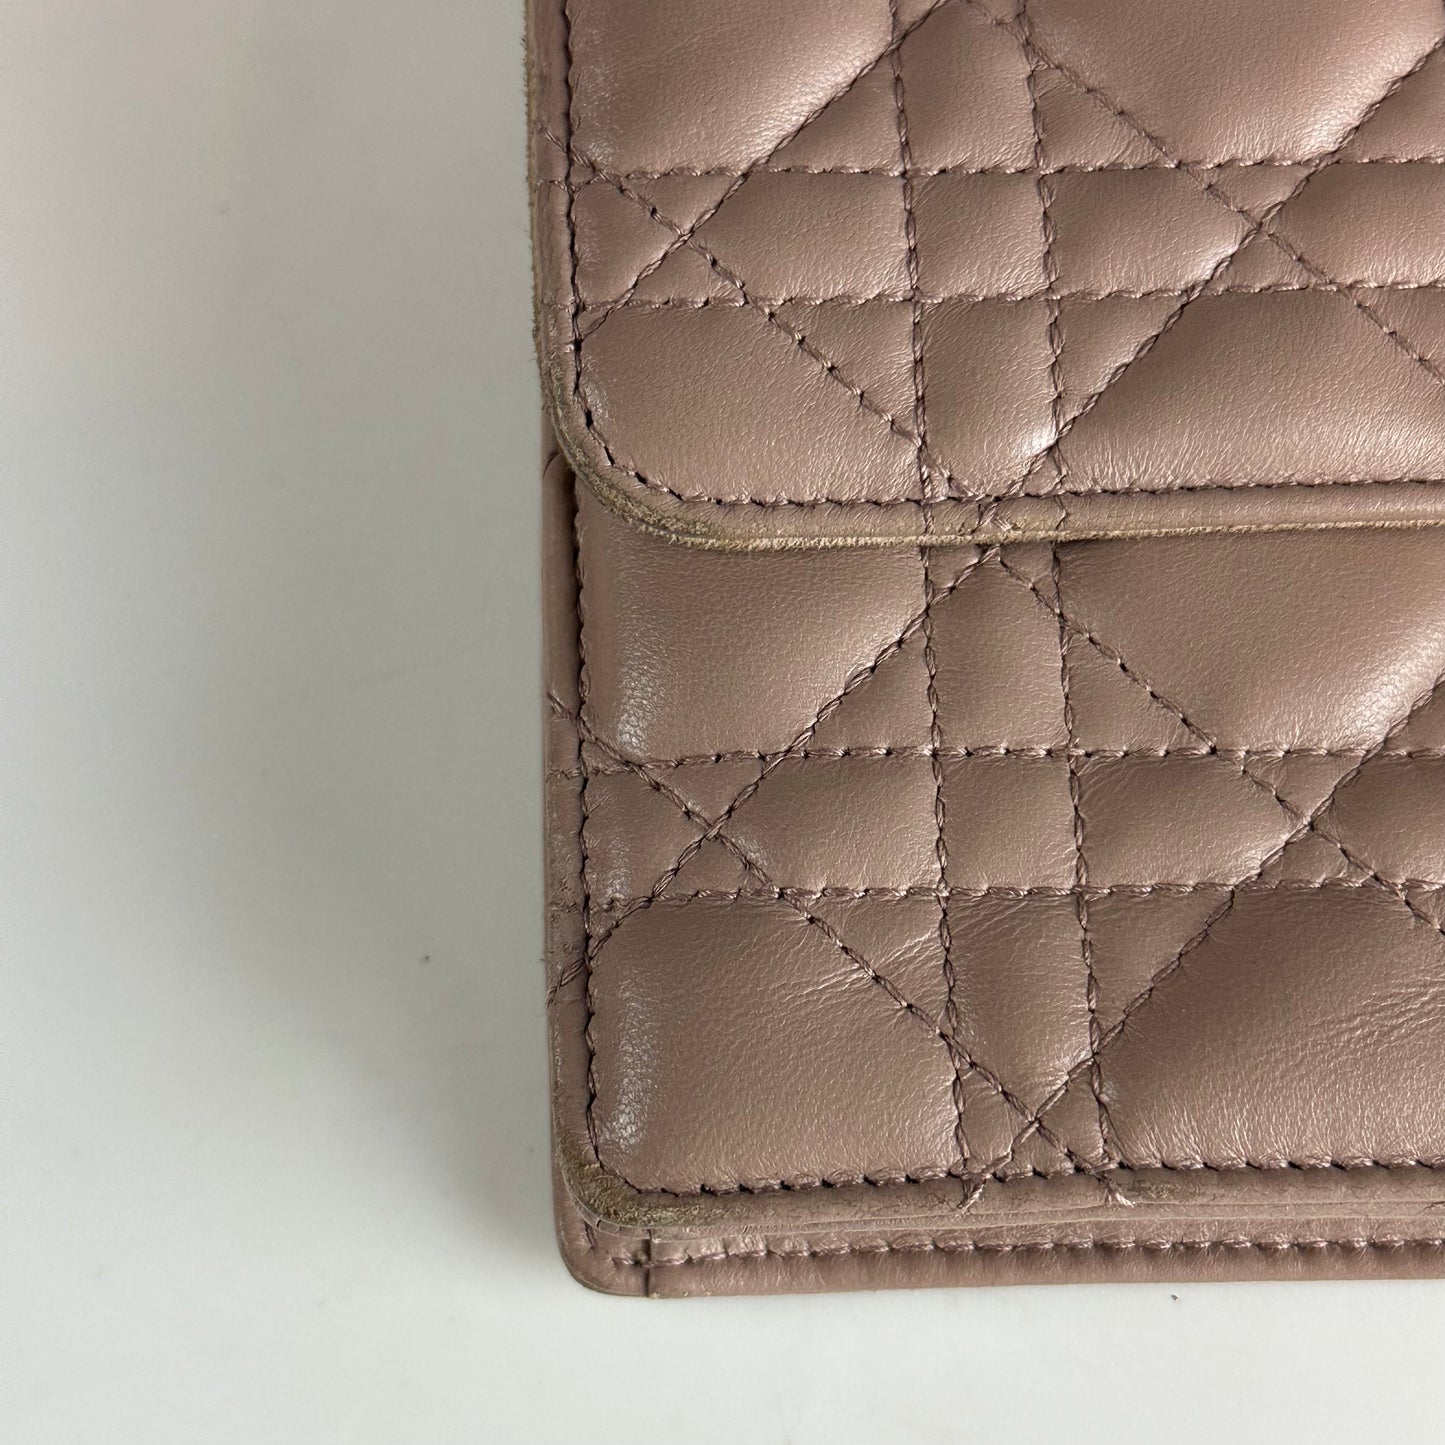 DIOR - Dioraddict wallet on chain pink leather